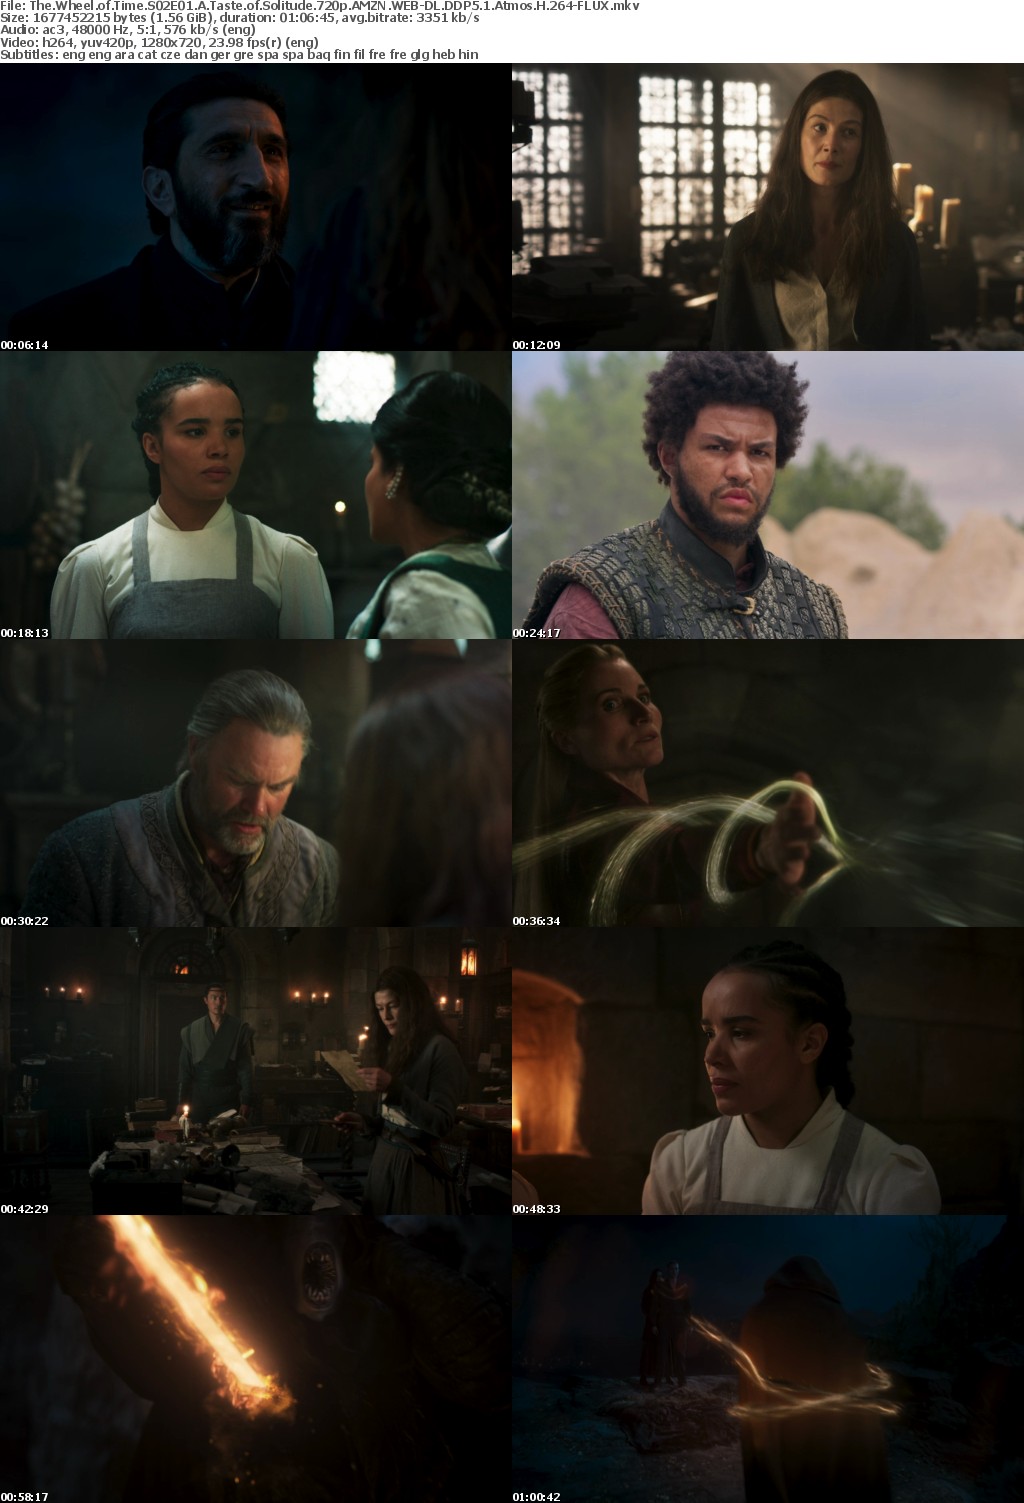 The Wheel of Time S02E01 A Taste of Solitude 720p AMZN WEB-DL DDP5 1 Atmos H 264-FLUX